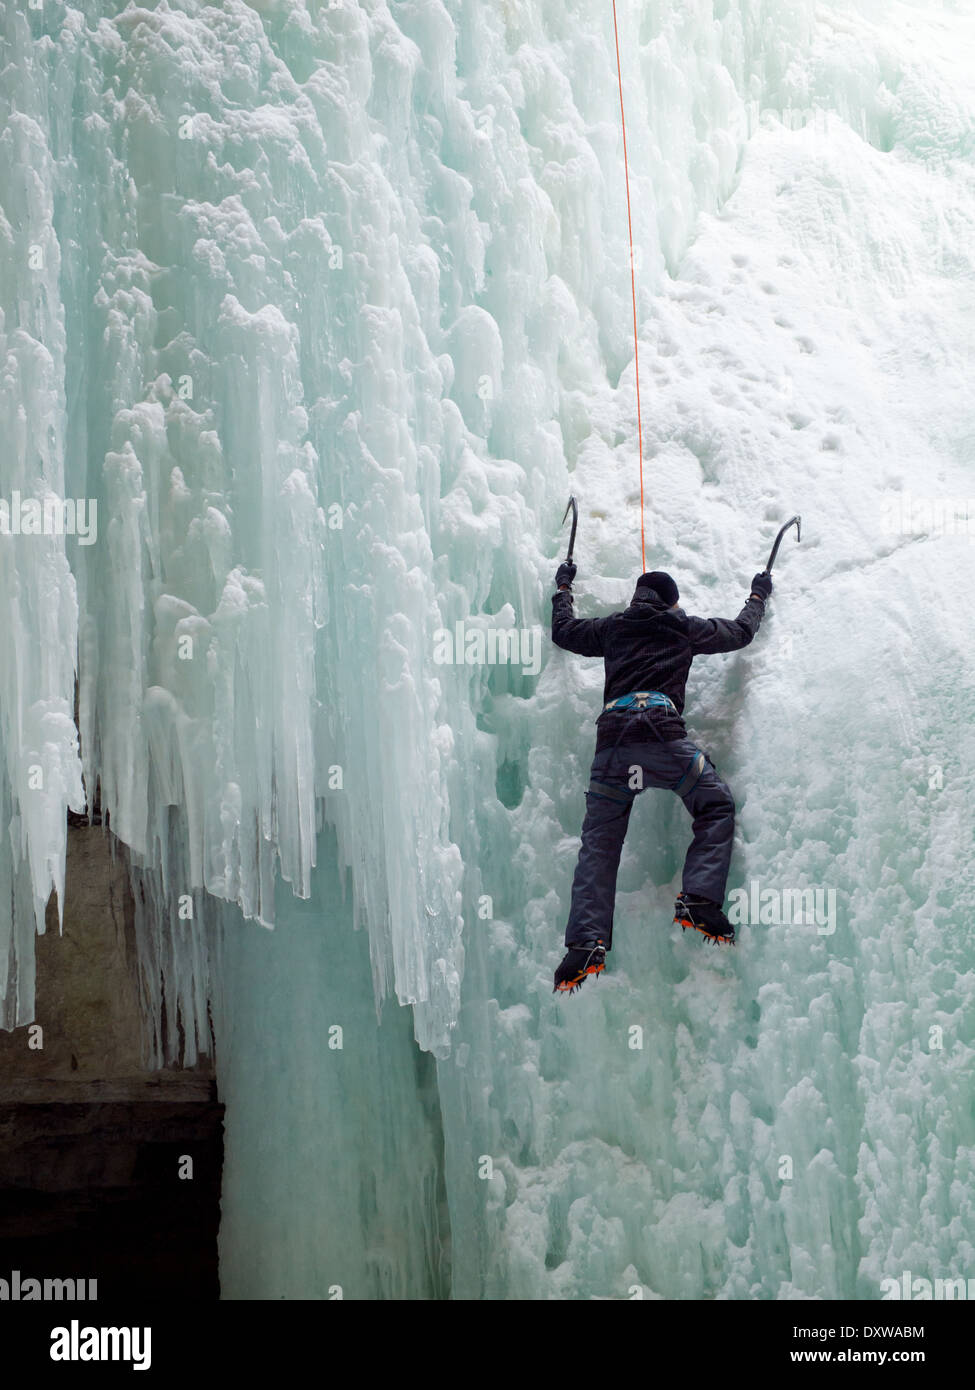 An ice climber scales "The Queen", a famous ice climb in Maligne Canyon, Jasper National Park, Alberta, Canada. Stock Photo